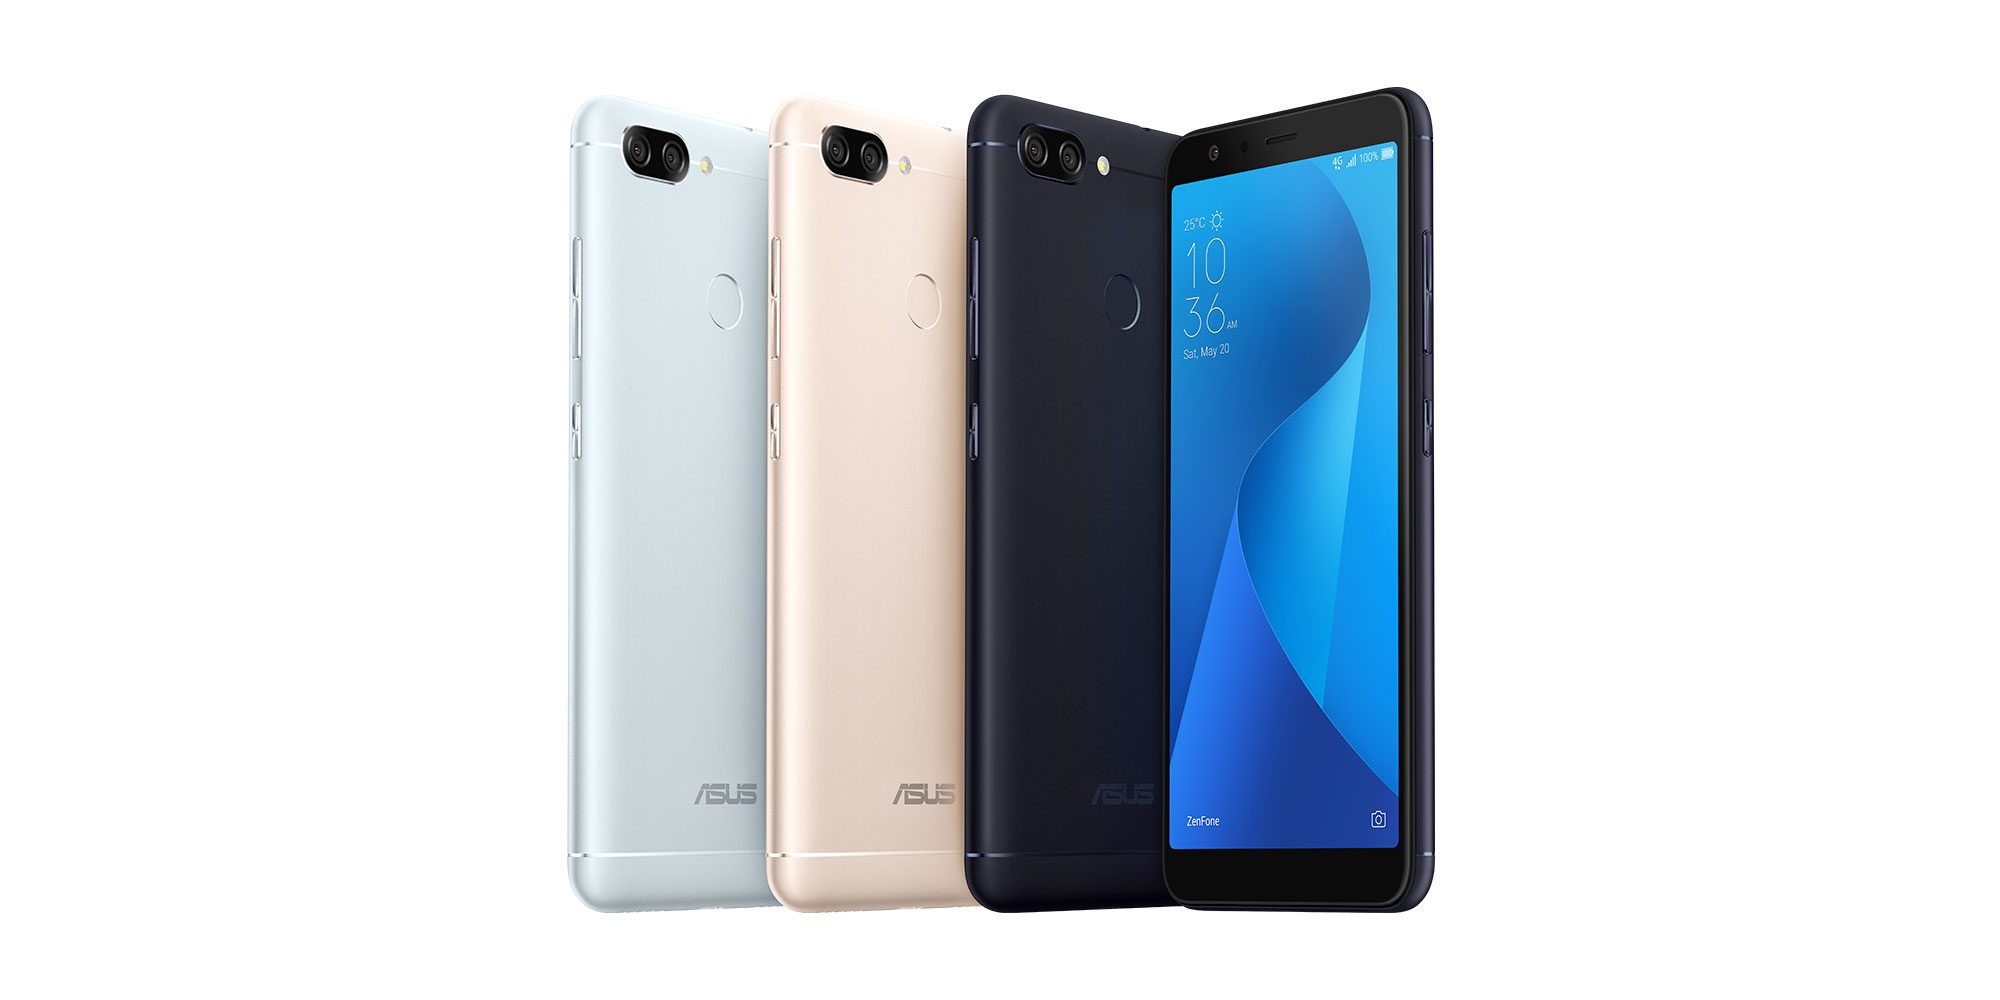 [Solved] - Disable Safe Mode on Asus Zenfone Max Plus